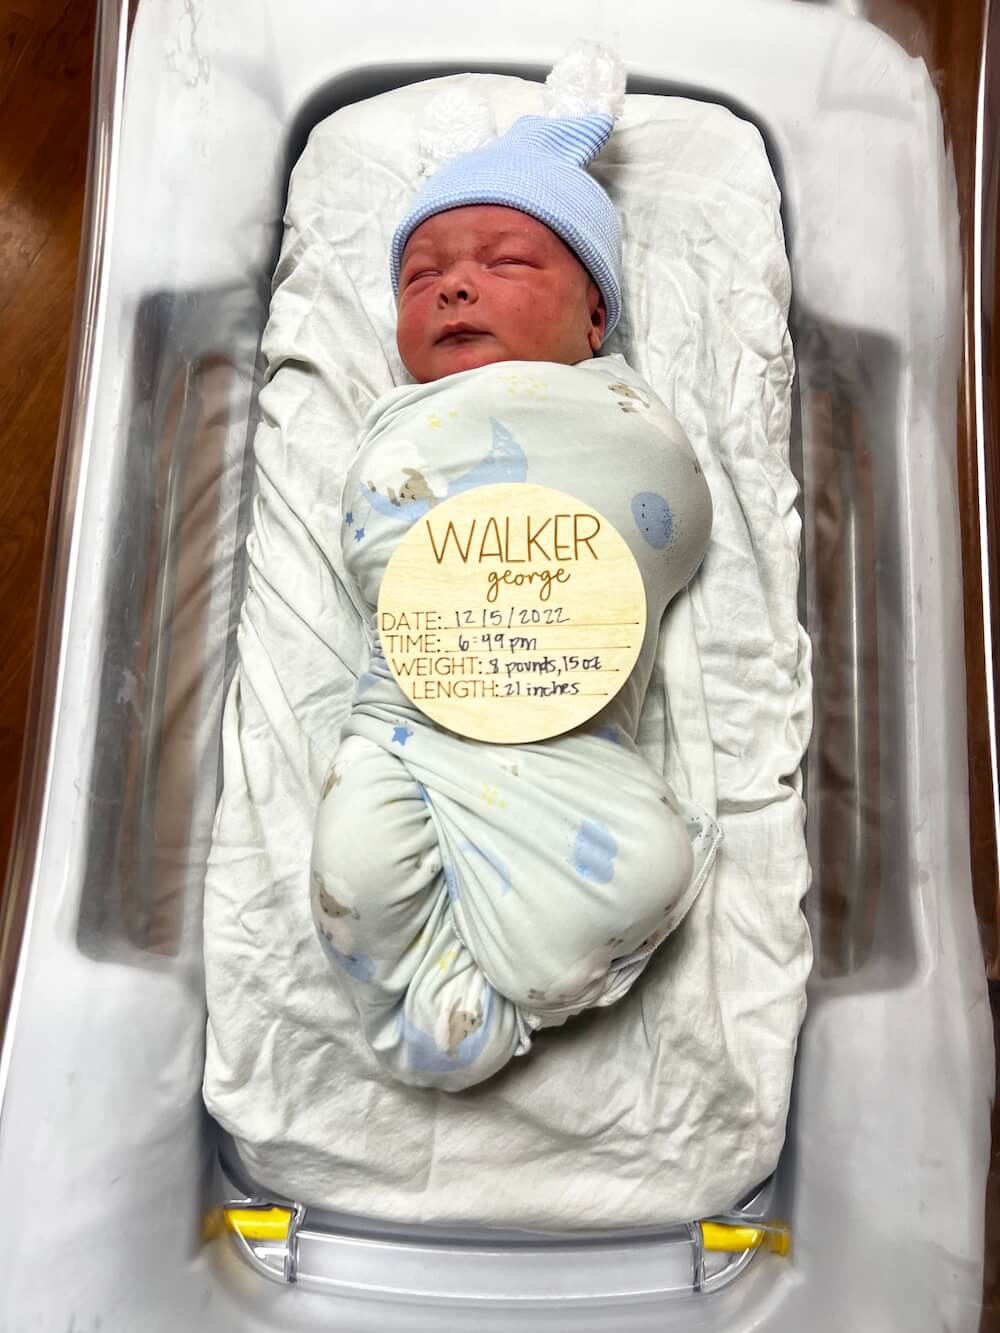 newborn baby swaddled in hospital bed with small round wooden sign that says Walker George